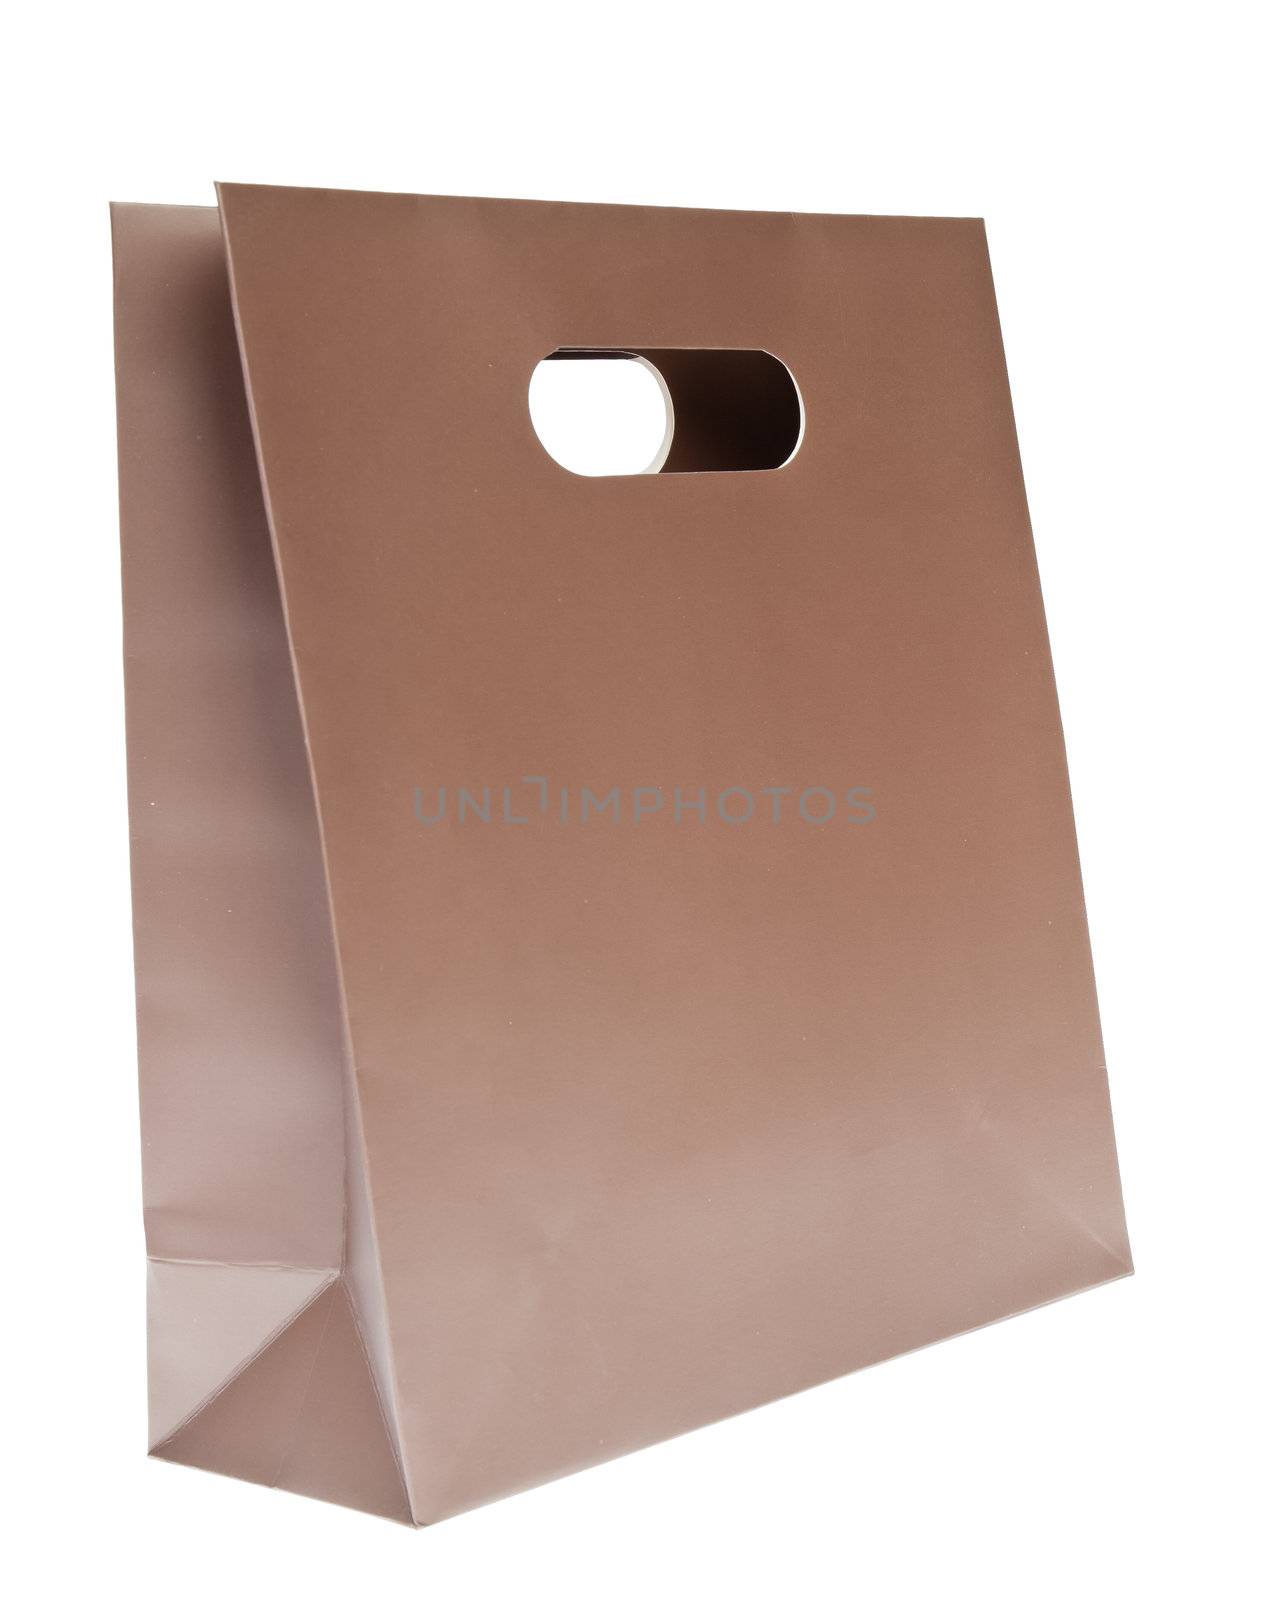 shopping bag, chocolate color by FrameAngel